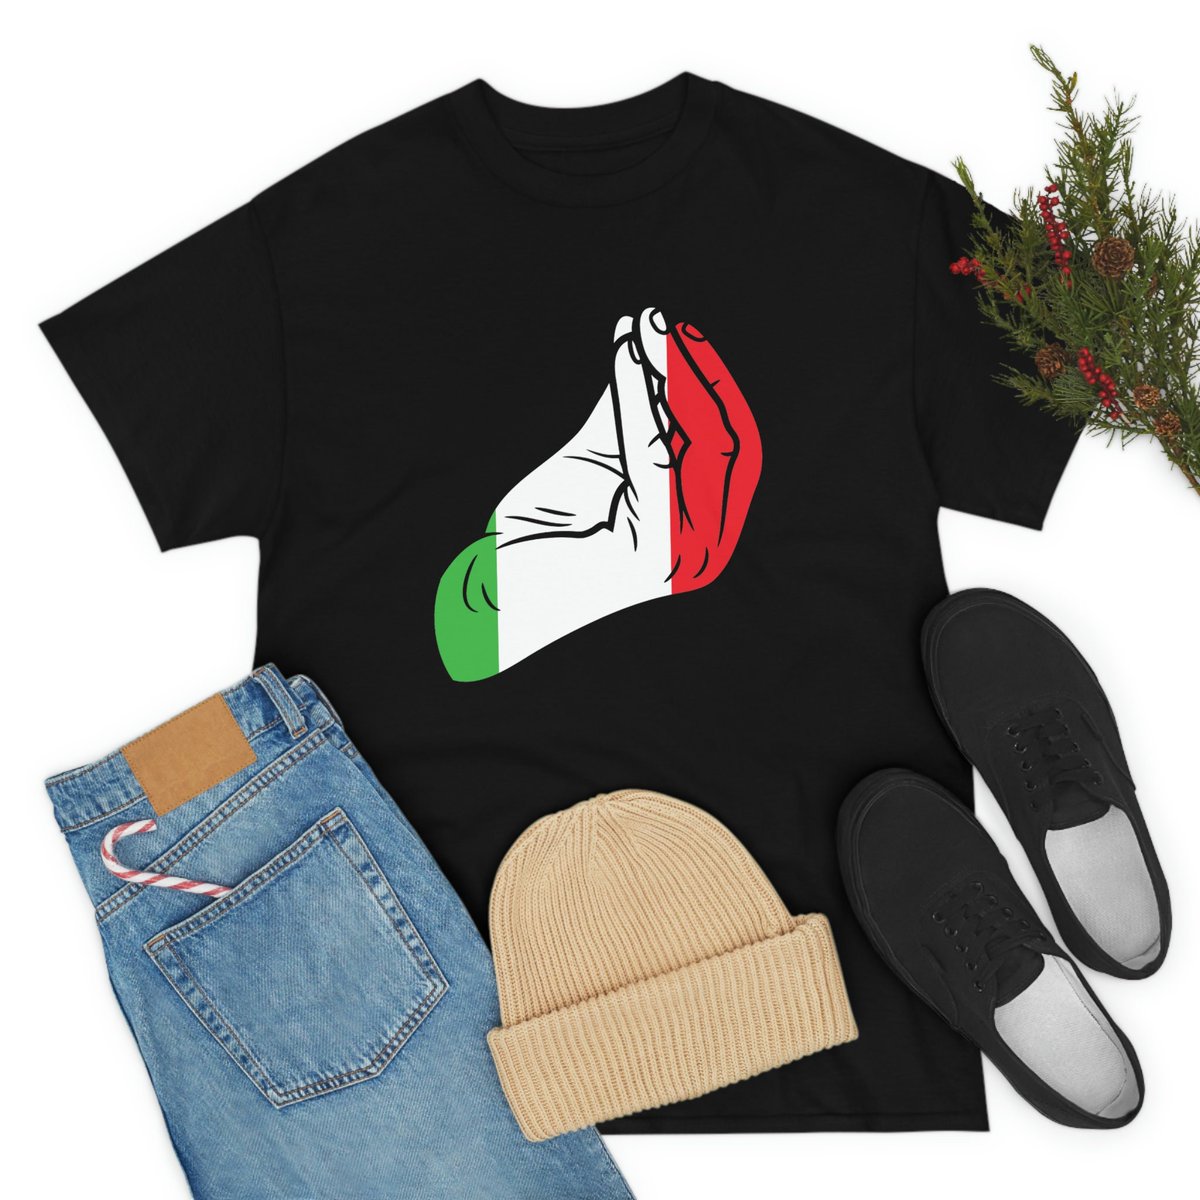 Excited to share the latest addition to my #etsy shop: Italian Hand Gestures T-Shirt / Funny Italian T-Shirt / Italian Pride Tee etsy.me/3m68k5C #italiangifts #italianhandgesture #italianshirt #handgestures #italiatshirt #italysouvenir #italy #italianamerican